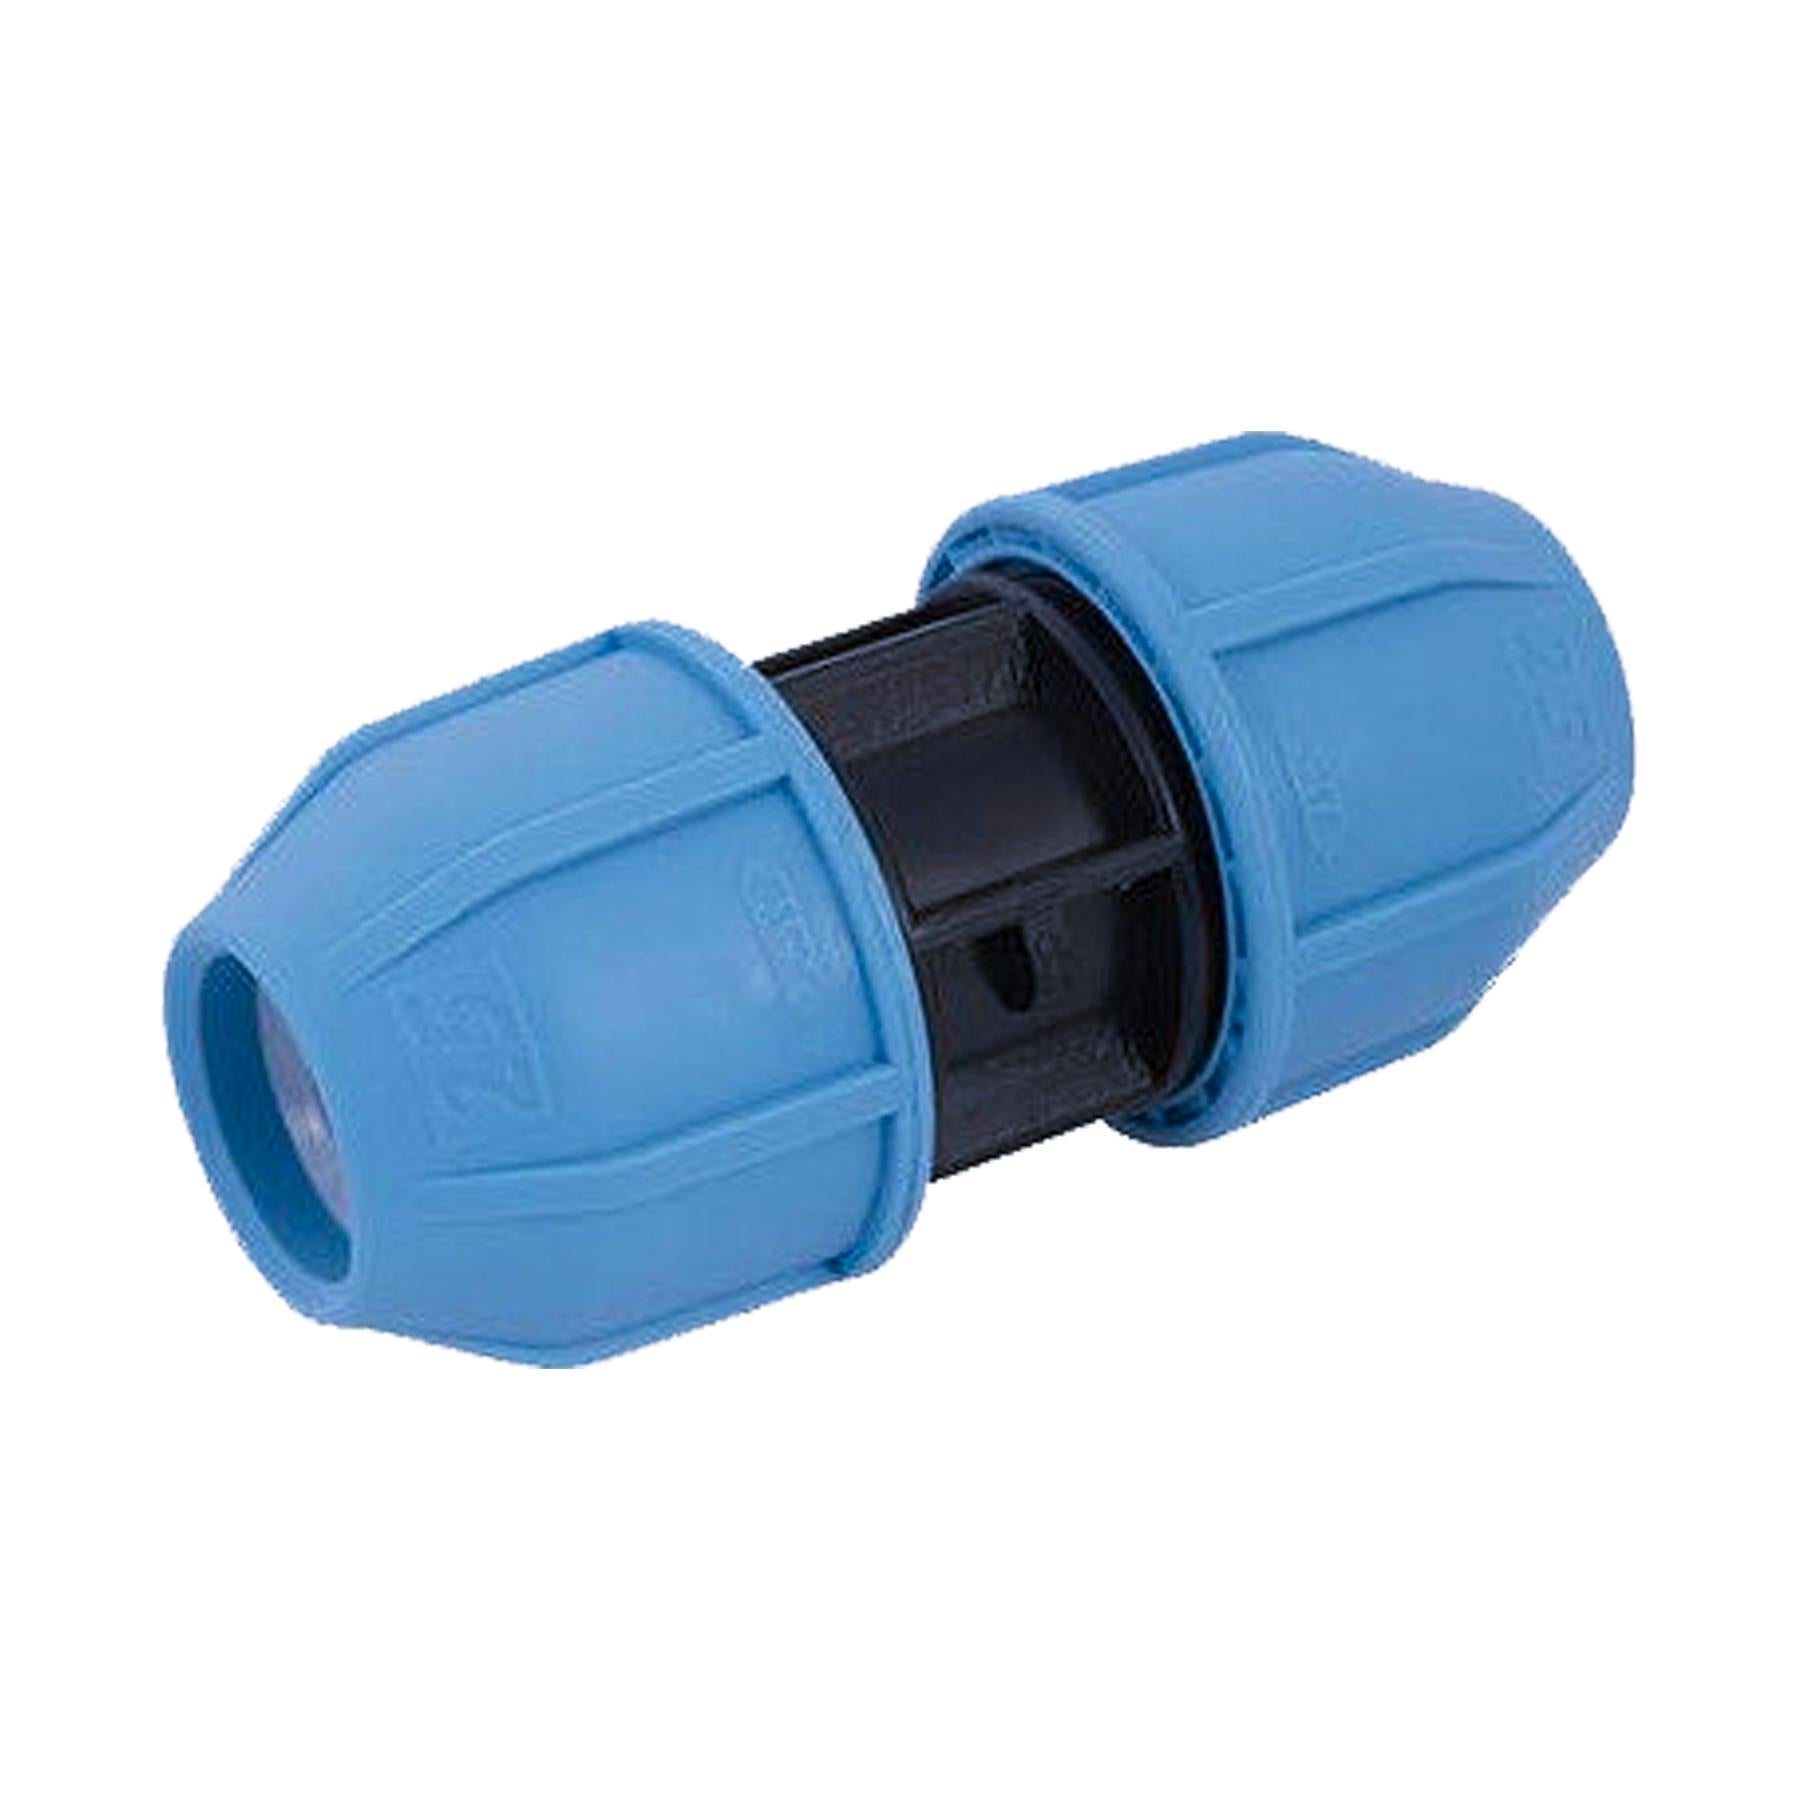 MDPE Straight Pipe Coupling 25 x25mm Polypropylene Compression Fitting Connector